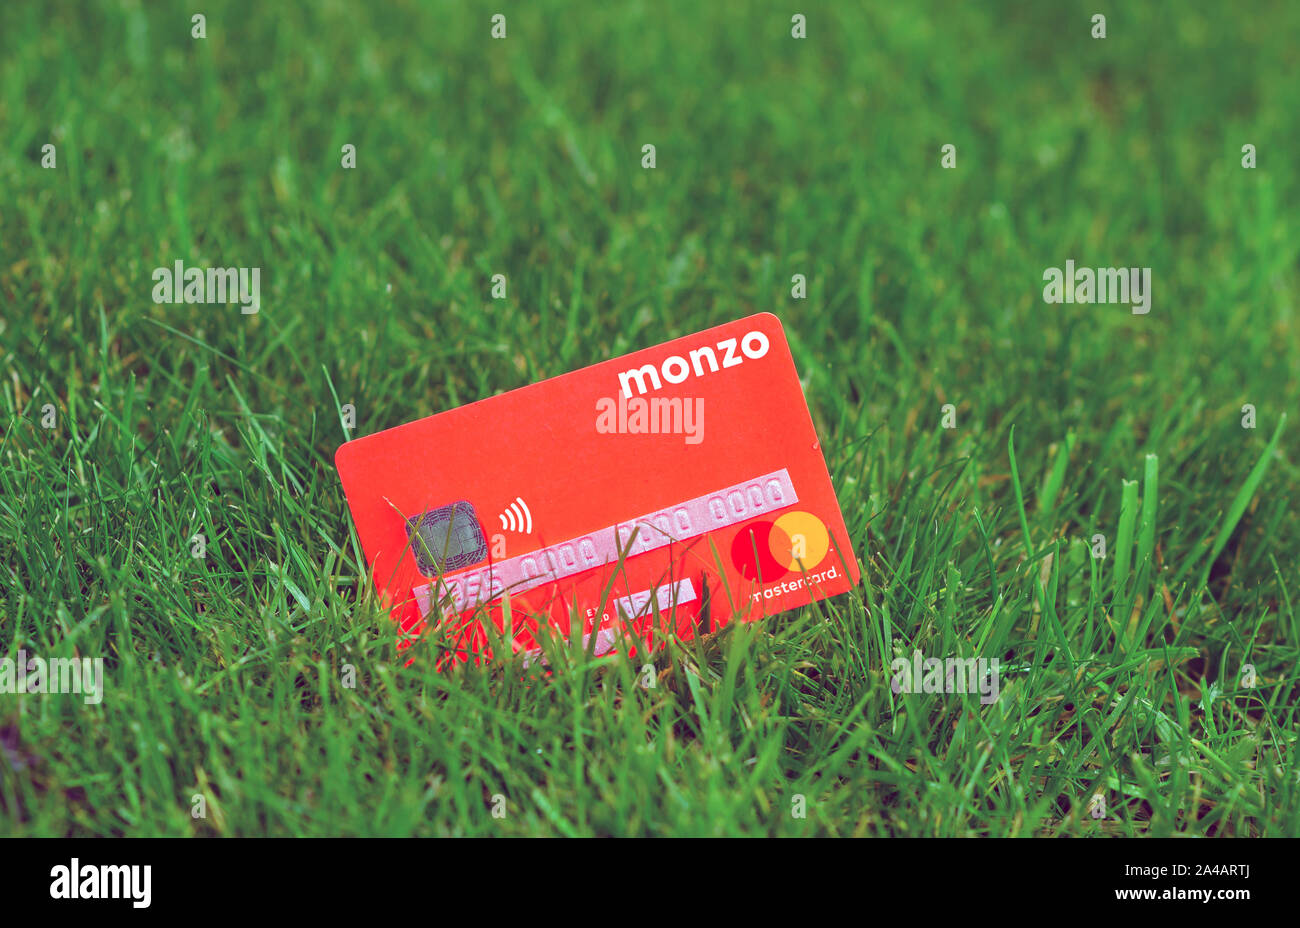 MONZO bank card on the grass. All sensitive information on the card is covered by stickers with dummy numbers. Stock Photo